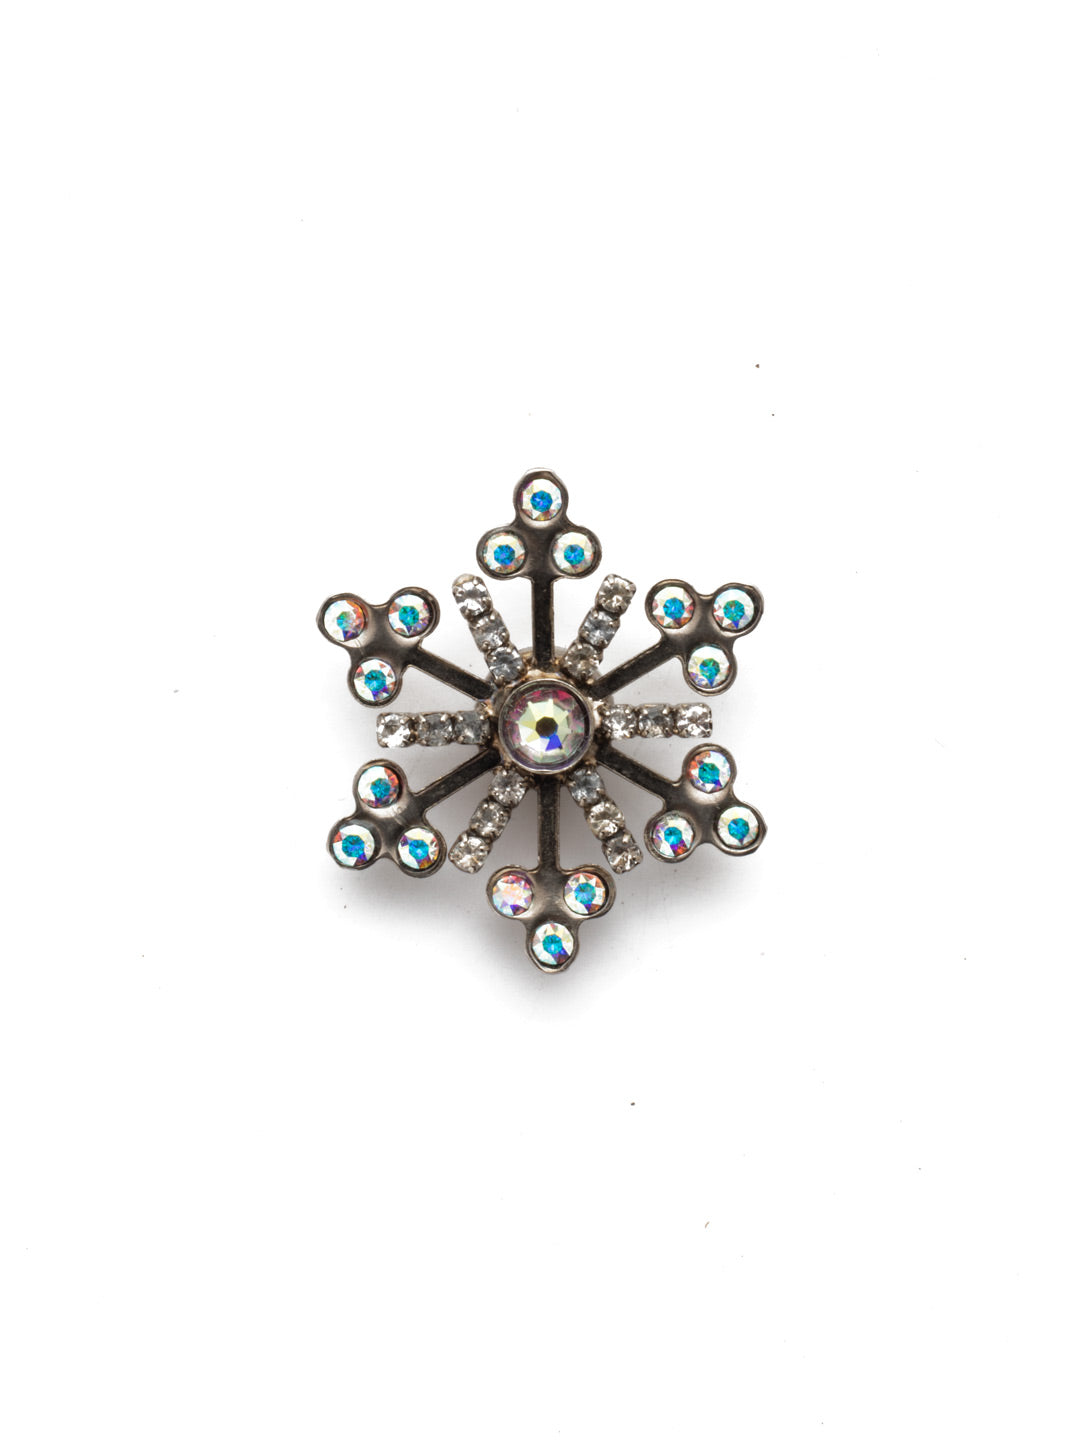 Alba Magnetic Charm - CHM8ASCAB - <p>A snowflake Magnetic charm is just what you need this holiday seaso and is engulfed in beautiful petite cyrstals. Your bag, blazer, dress or refrigerator will now have the perfect shine. From Sorrelli's Crystal Aurora Borealis collection in our Antique Silver-tone finish.</p>